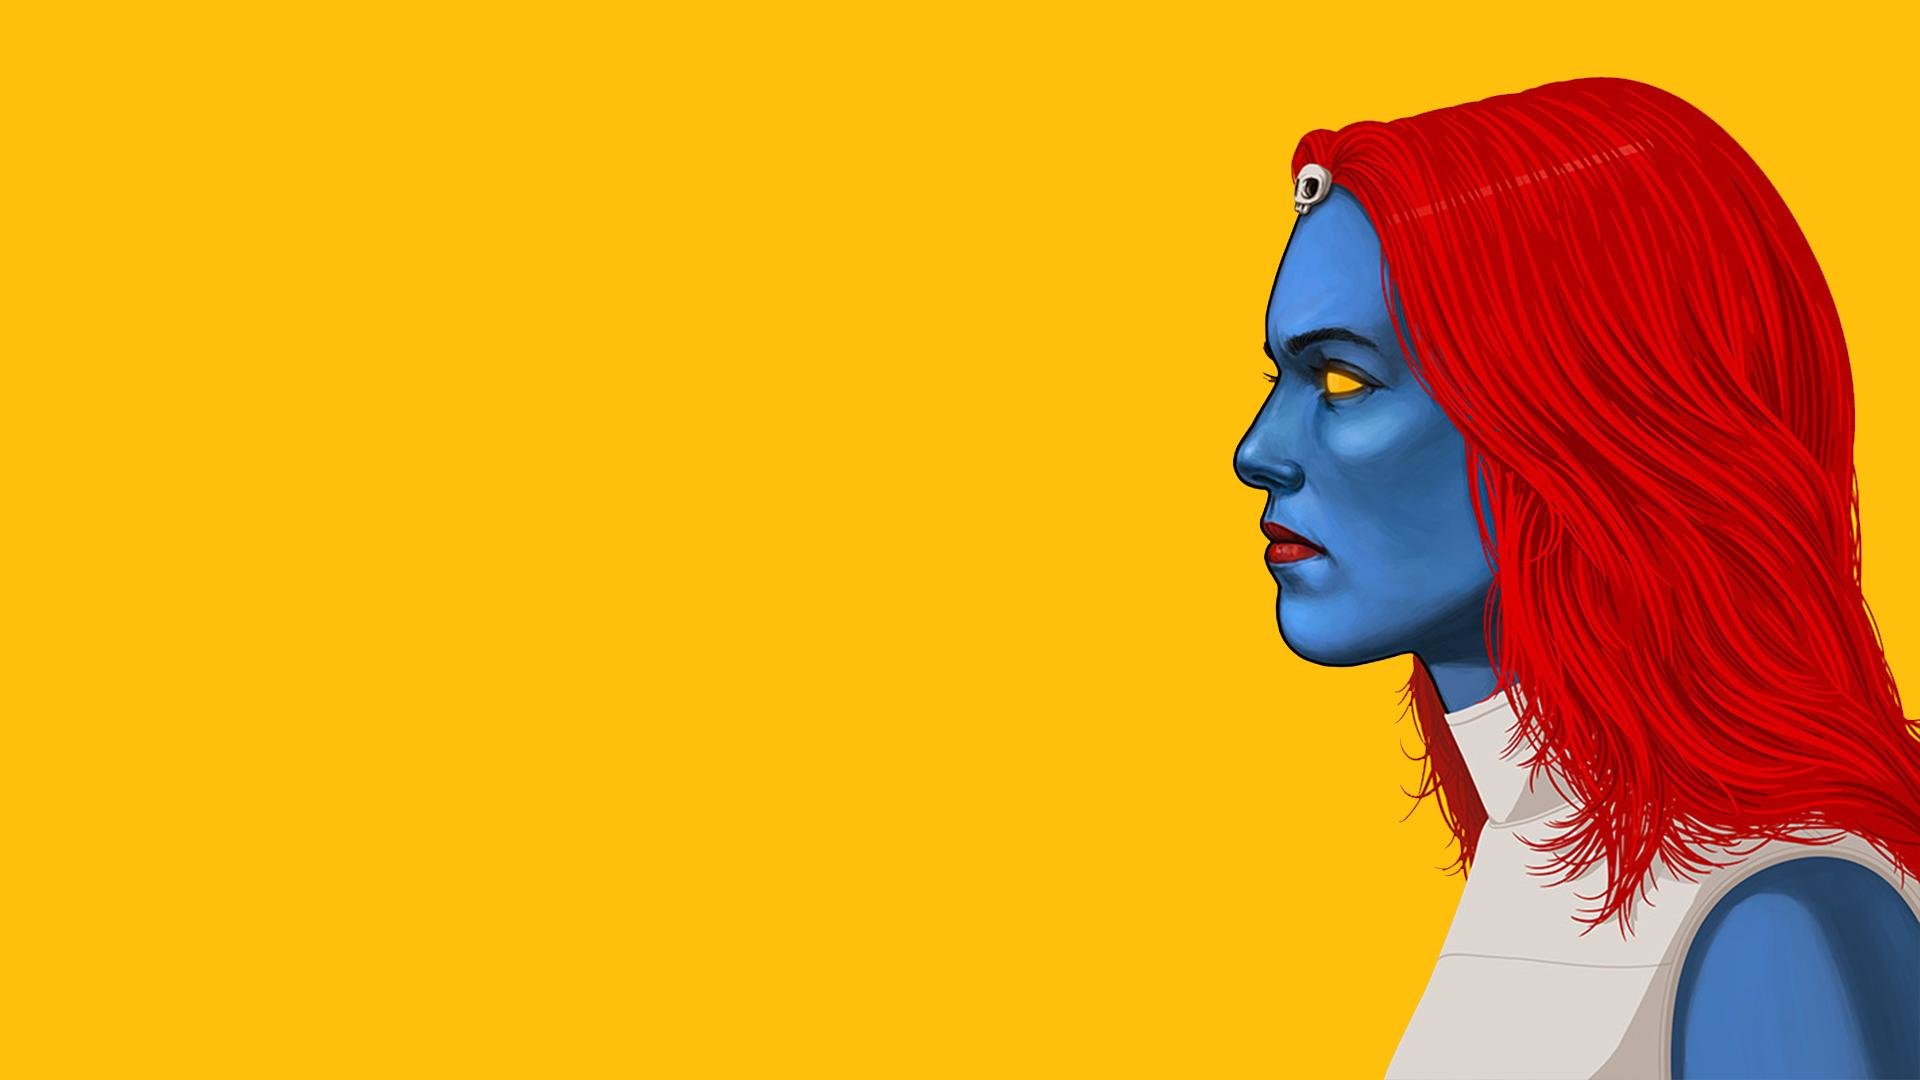 Awesome Mystique free wallpaper ID:100832 for full hd 1920x1080 computer